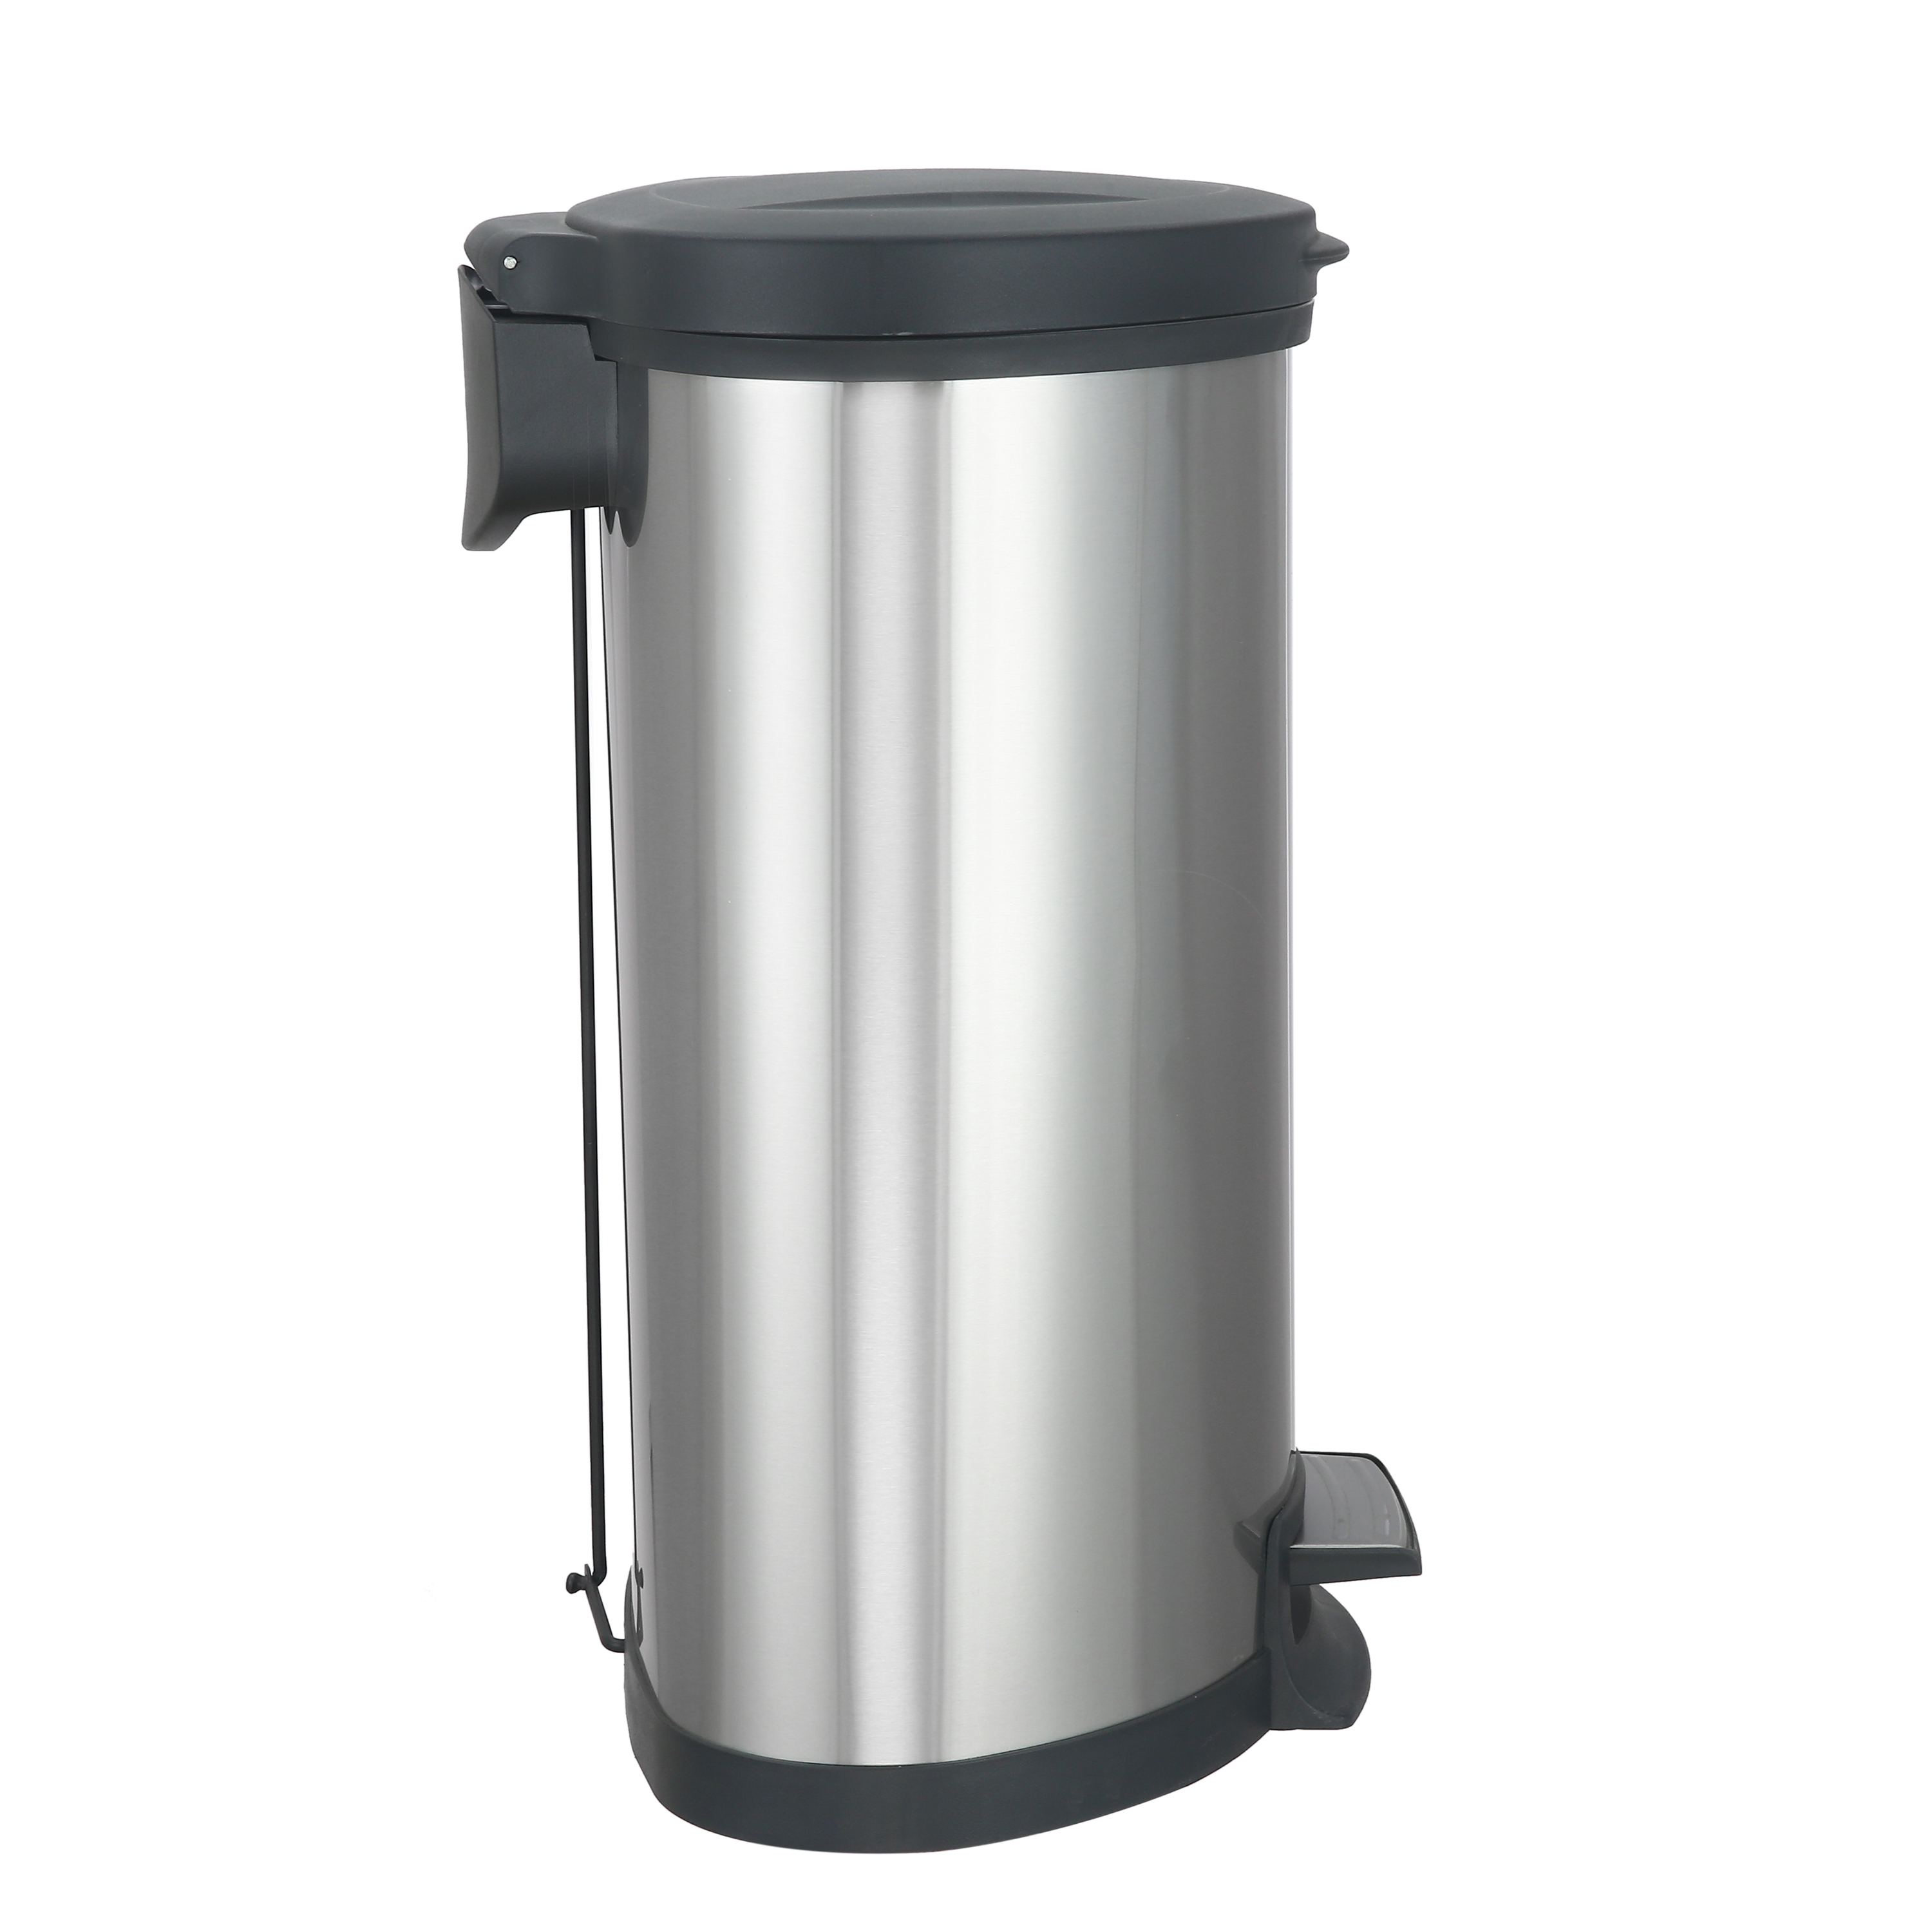 Mainstays 14.2 gal/54 Liter Stainless Steel Semi Round Kitchen Garbage Can with Lid - image 3 of 5